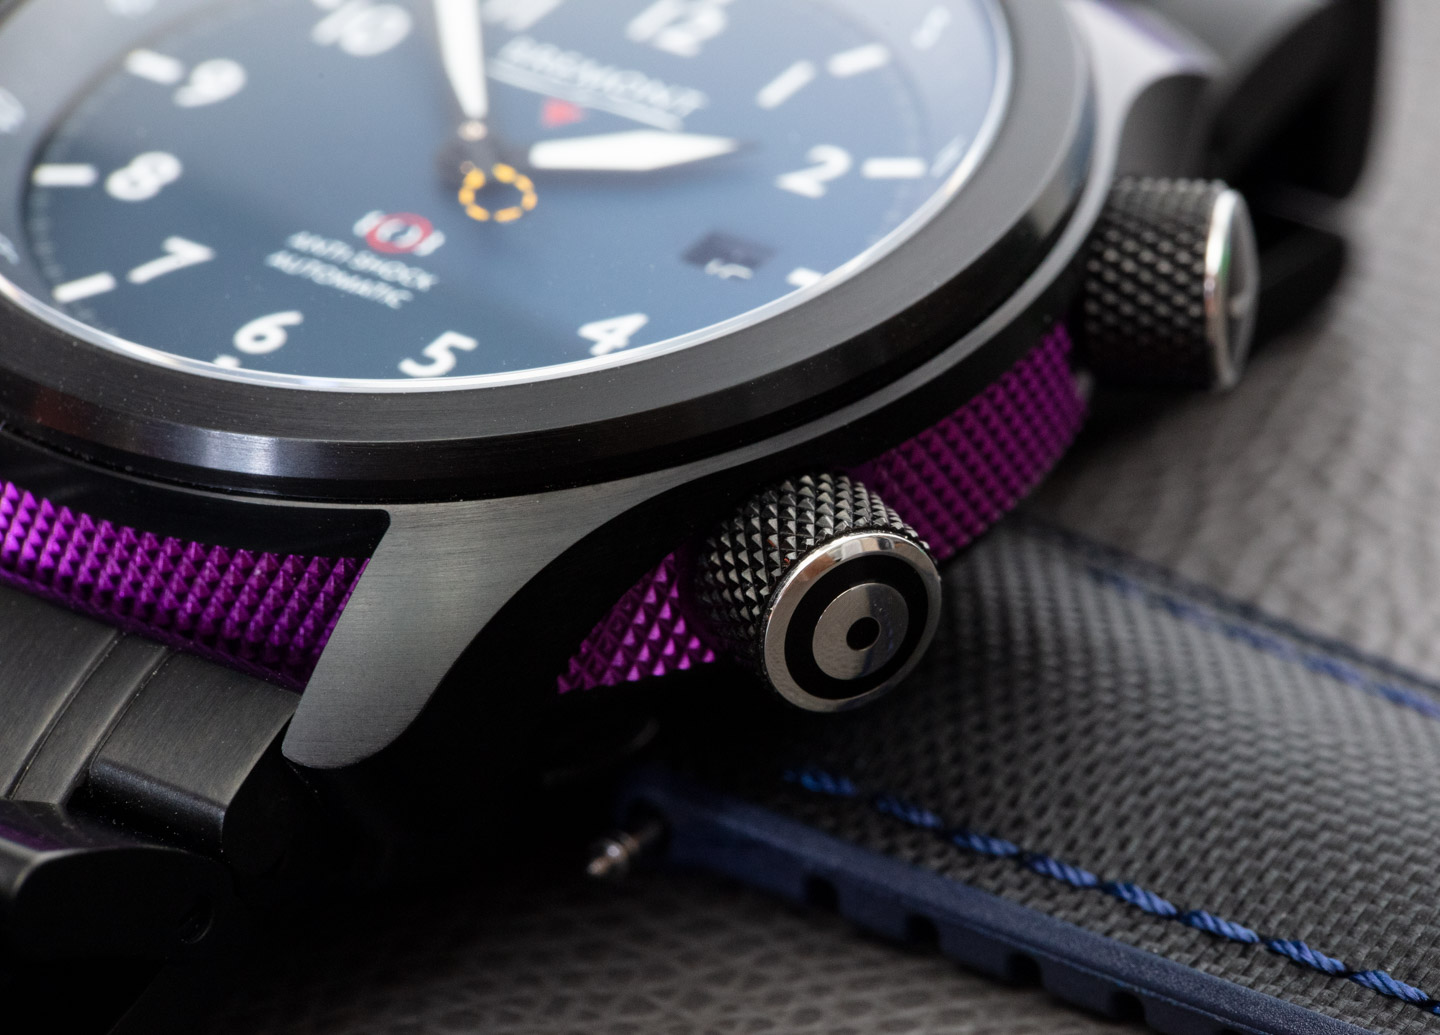 Watch Review: Bremont Martin Baker MBII From The Configurator